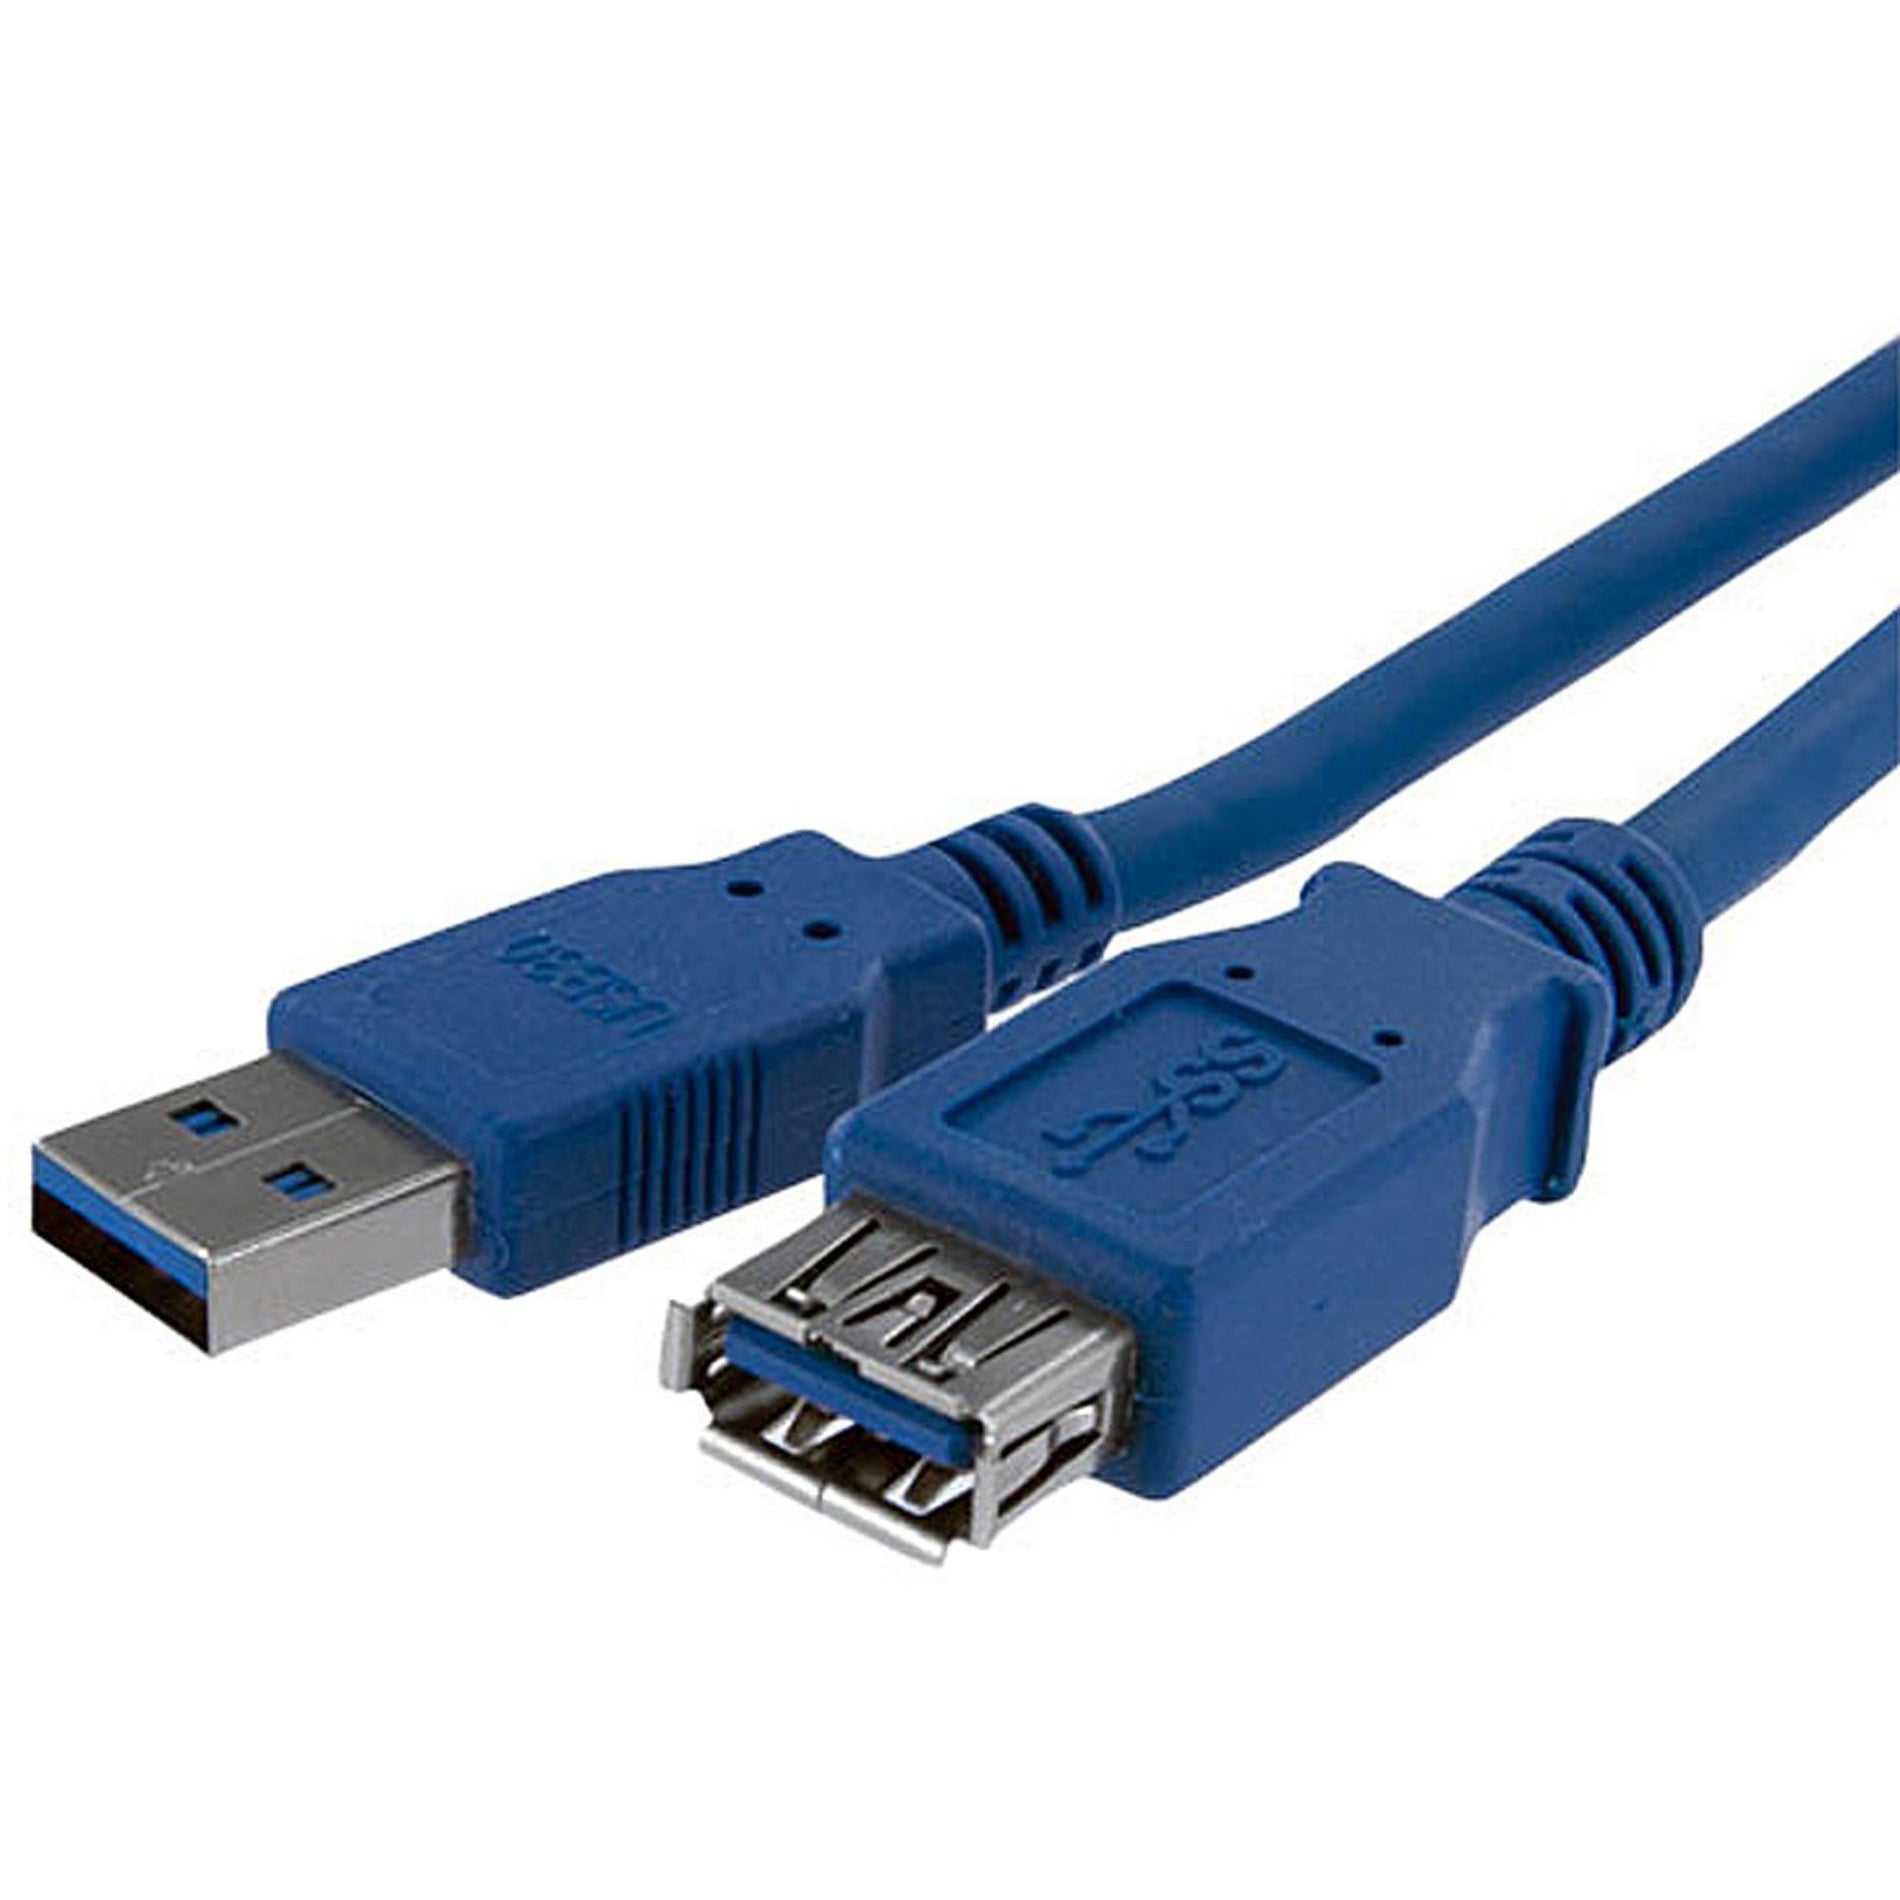 StarTech.com USB3SEXT1M 1m Blue SuperSpeed USB 3.0 Extension Cable A to A - M/F, 5 Gbit/s Data Transfer Rate, EMI Protection